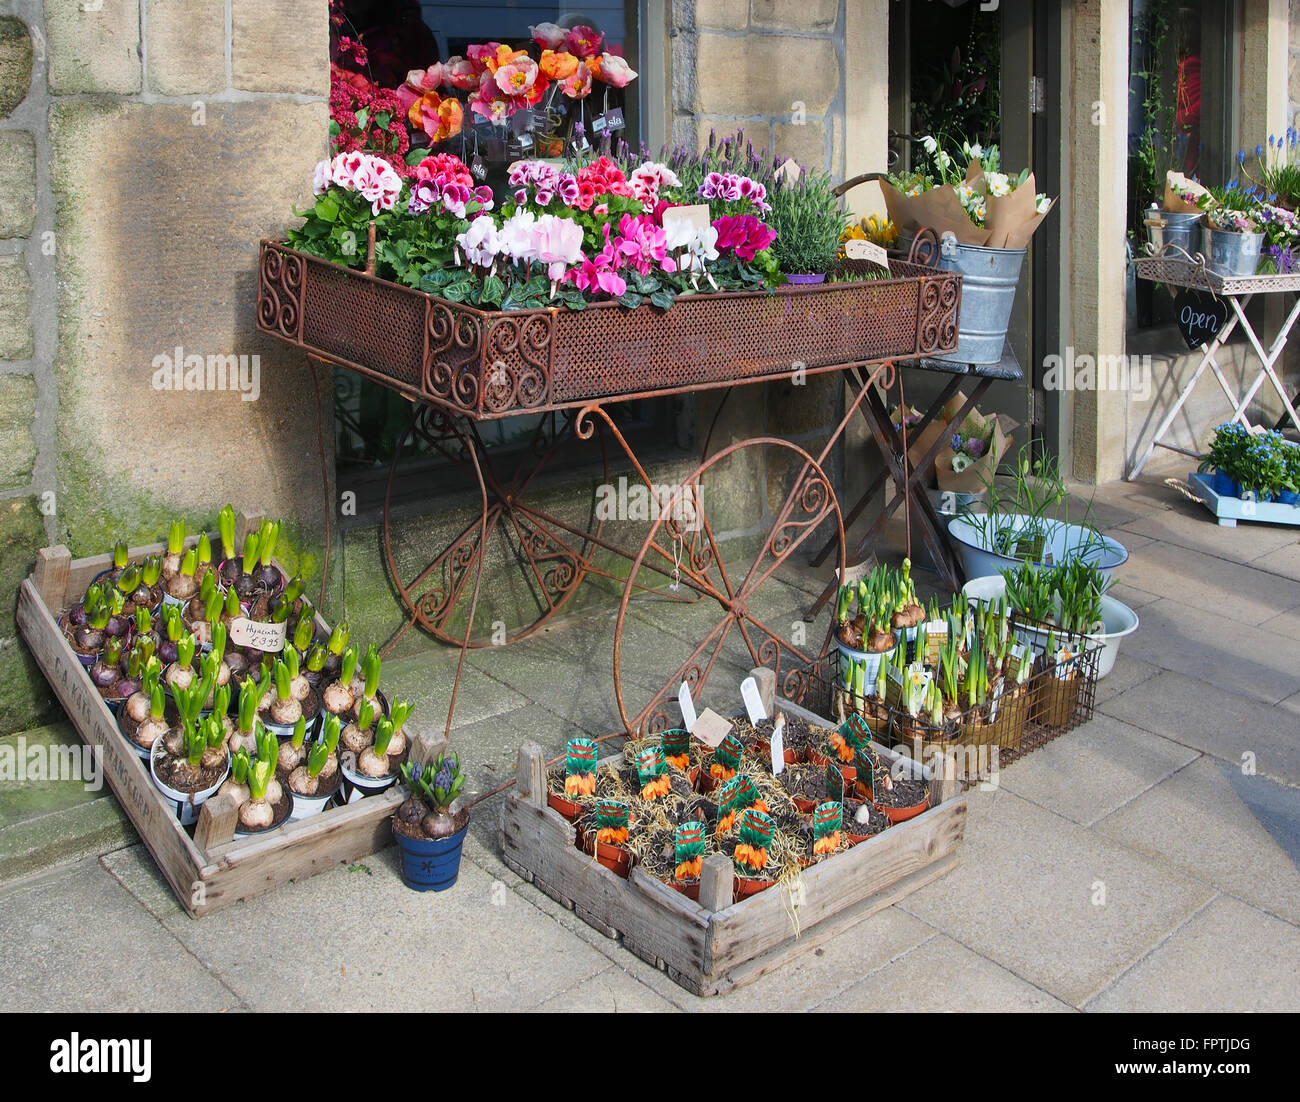 Florist's shop display with hyacinths, pelargoniums and cyclamen on the pavement in Hebden Bridge, Yorkshire. Stock Photo